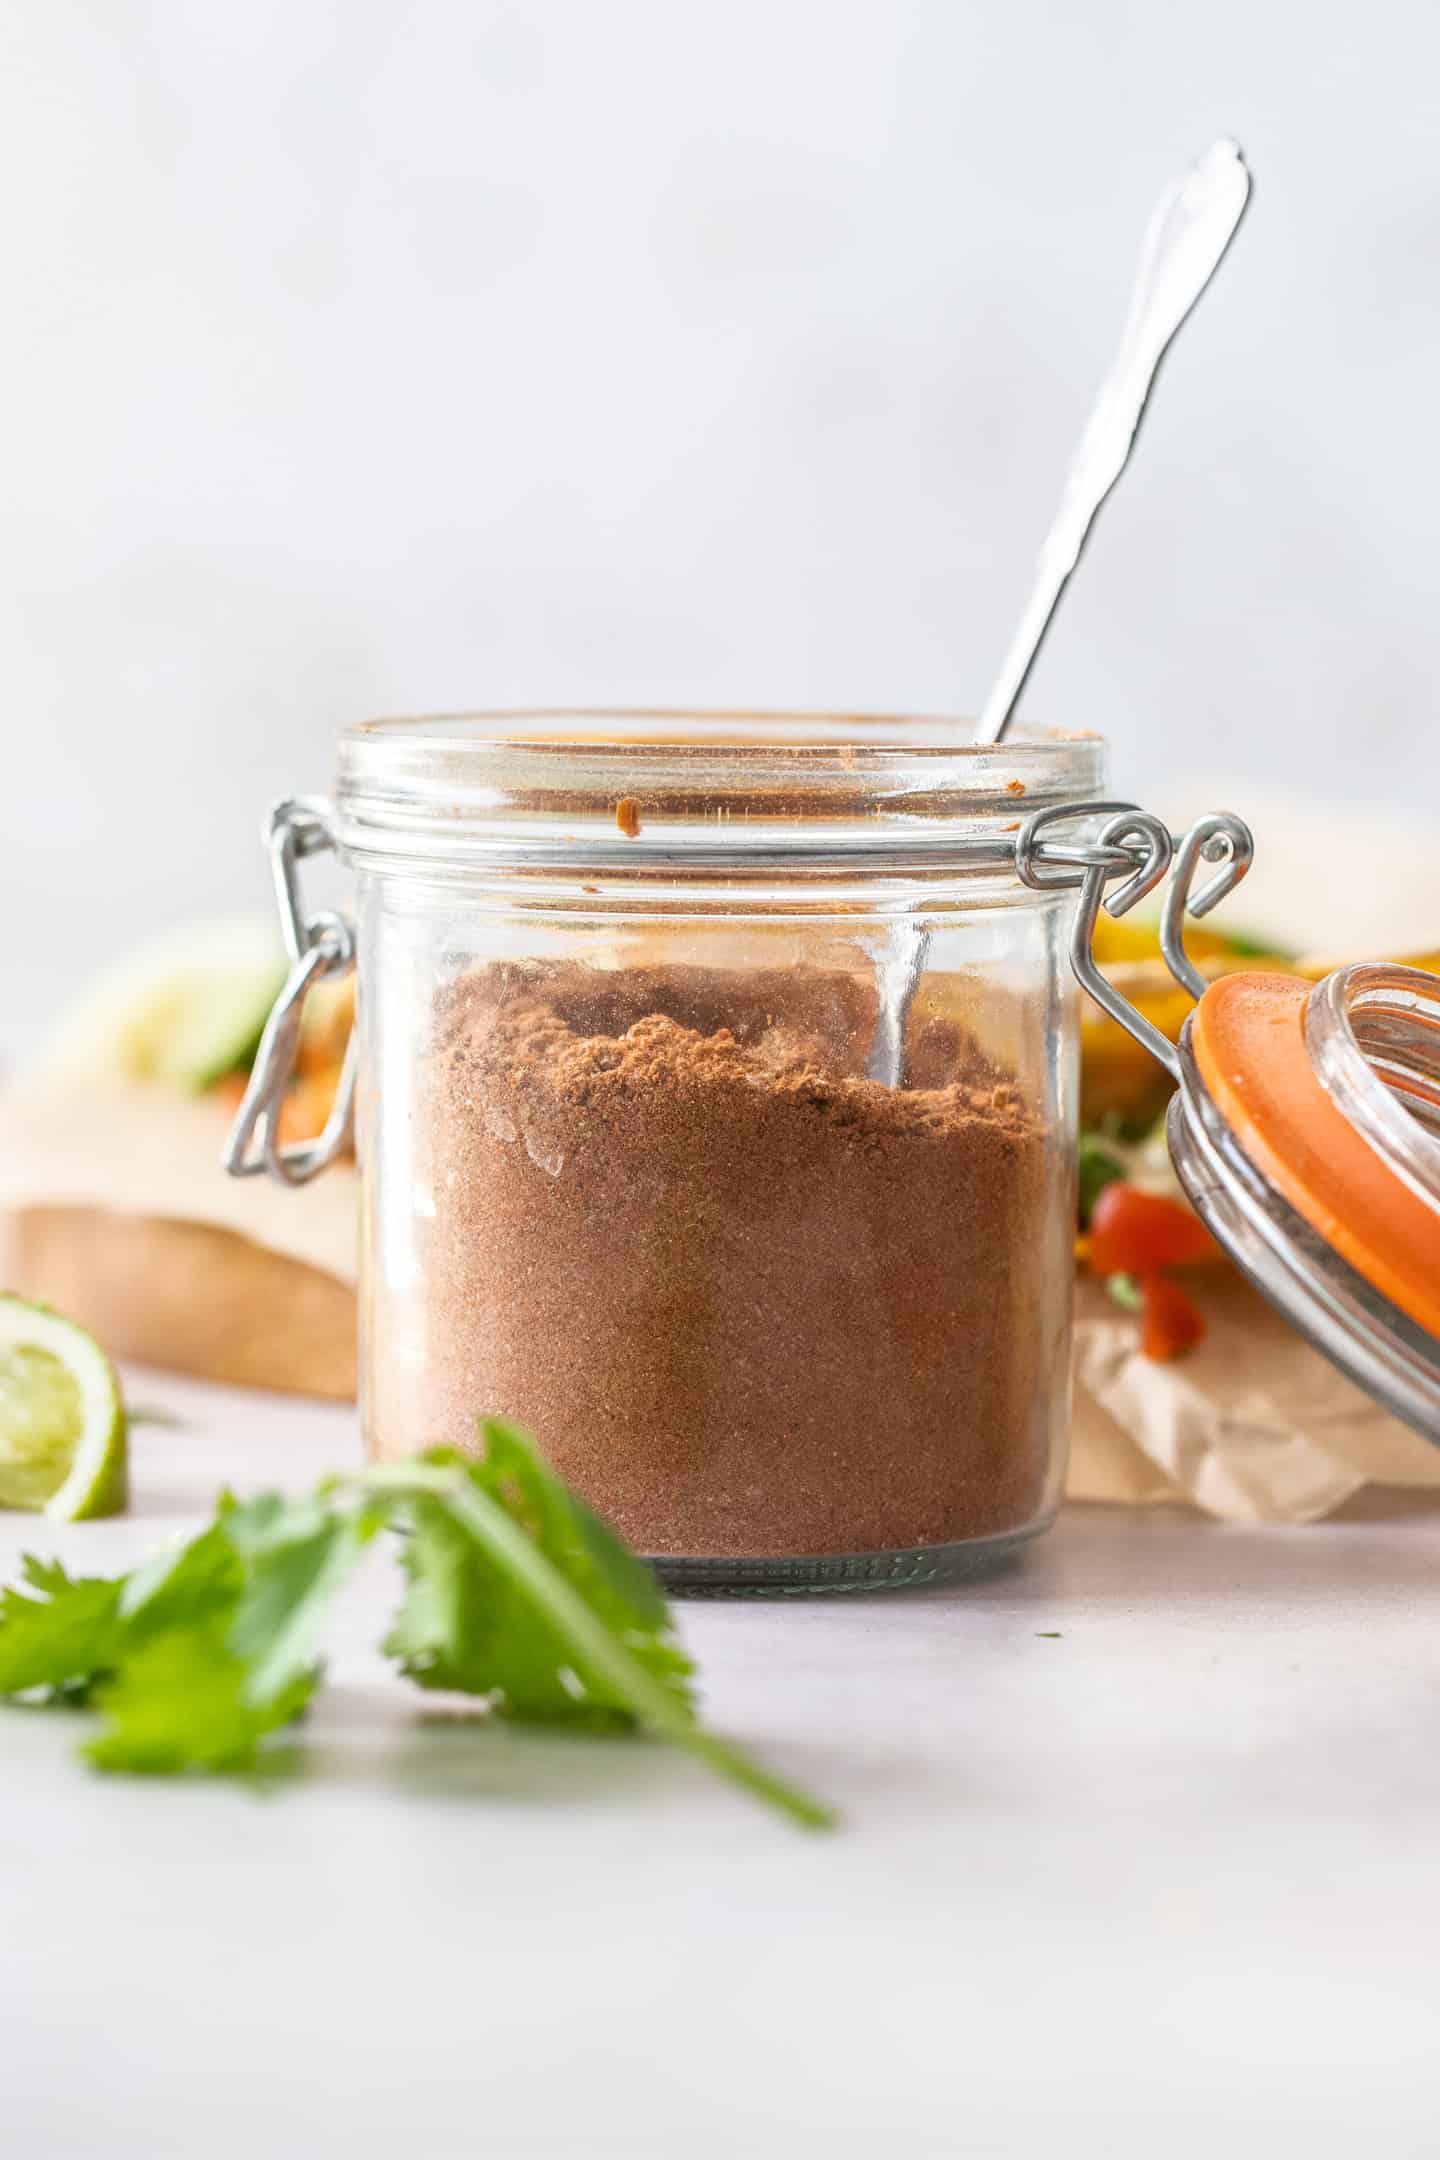 A small jar filled with taco seasoning with a spoon sticking out.